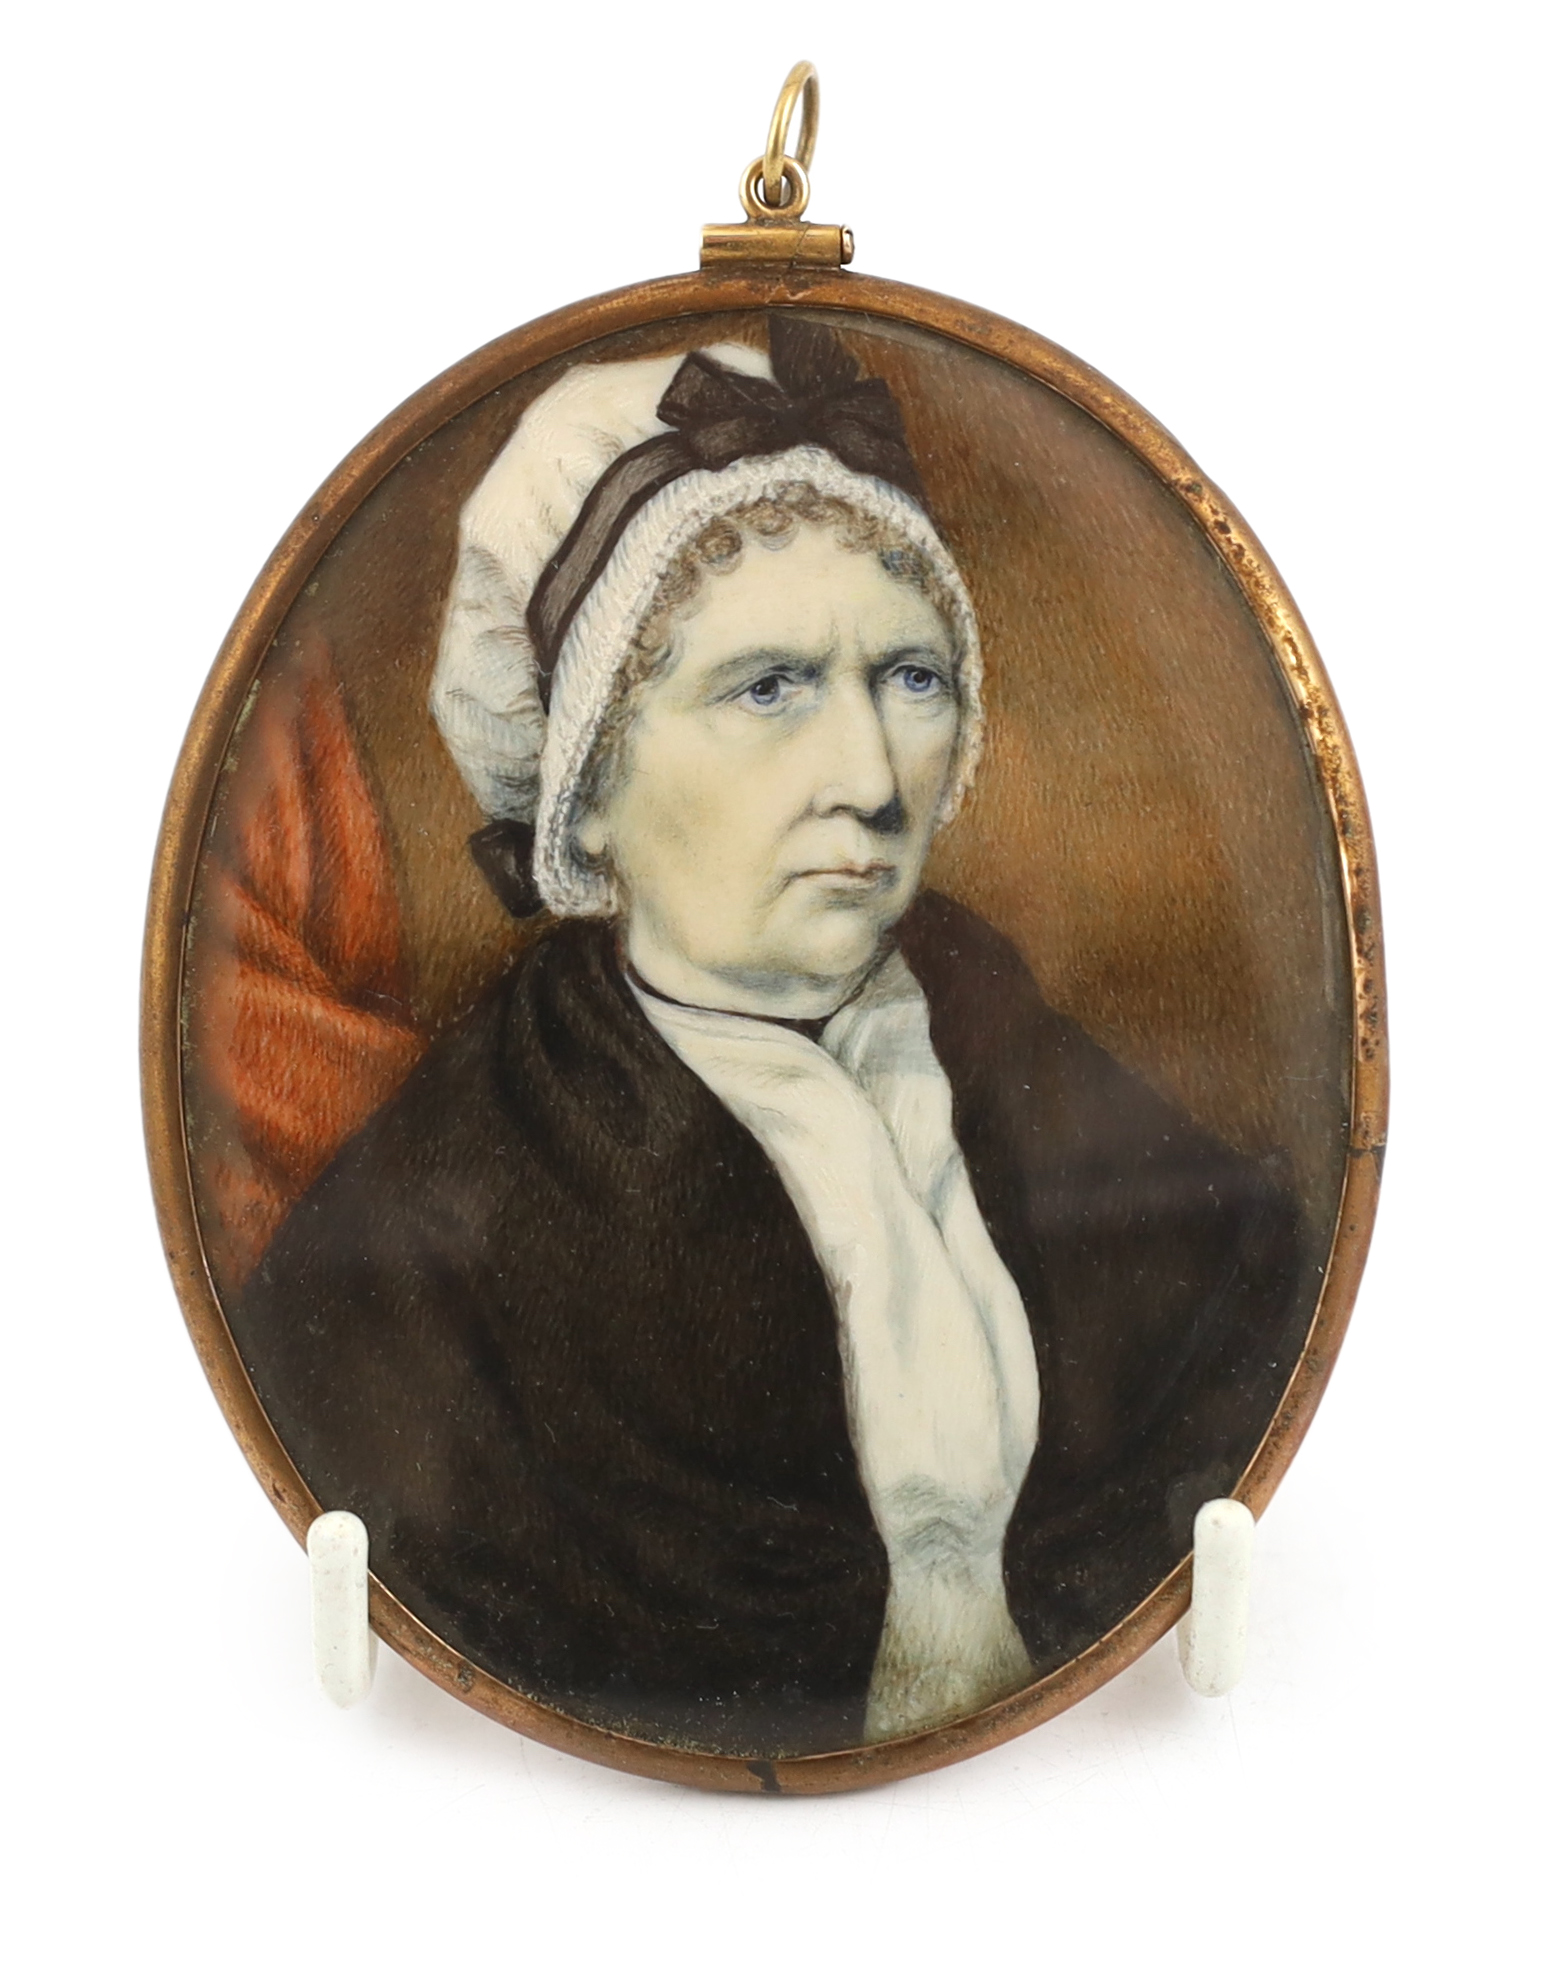 English School circa 1820, Portrait miniature of an elderly lady wearing a bonnet and brown shawl, watercolour on ivory, 8.5 x 7cm. CITES Submission reference UA96HZHB